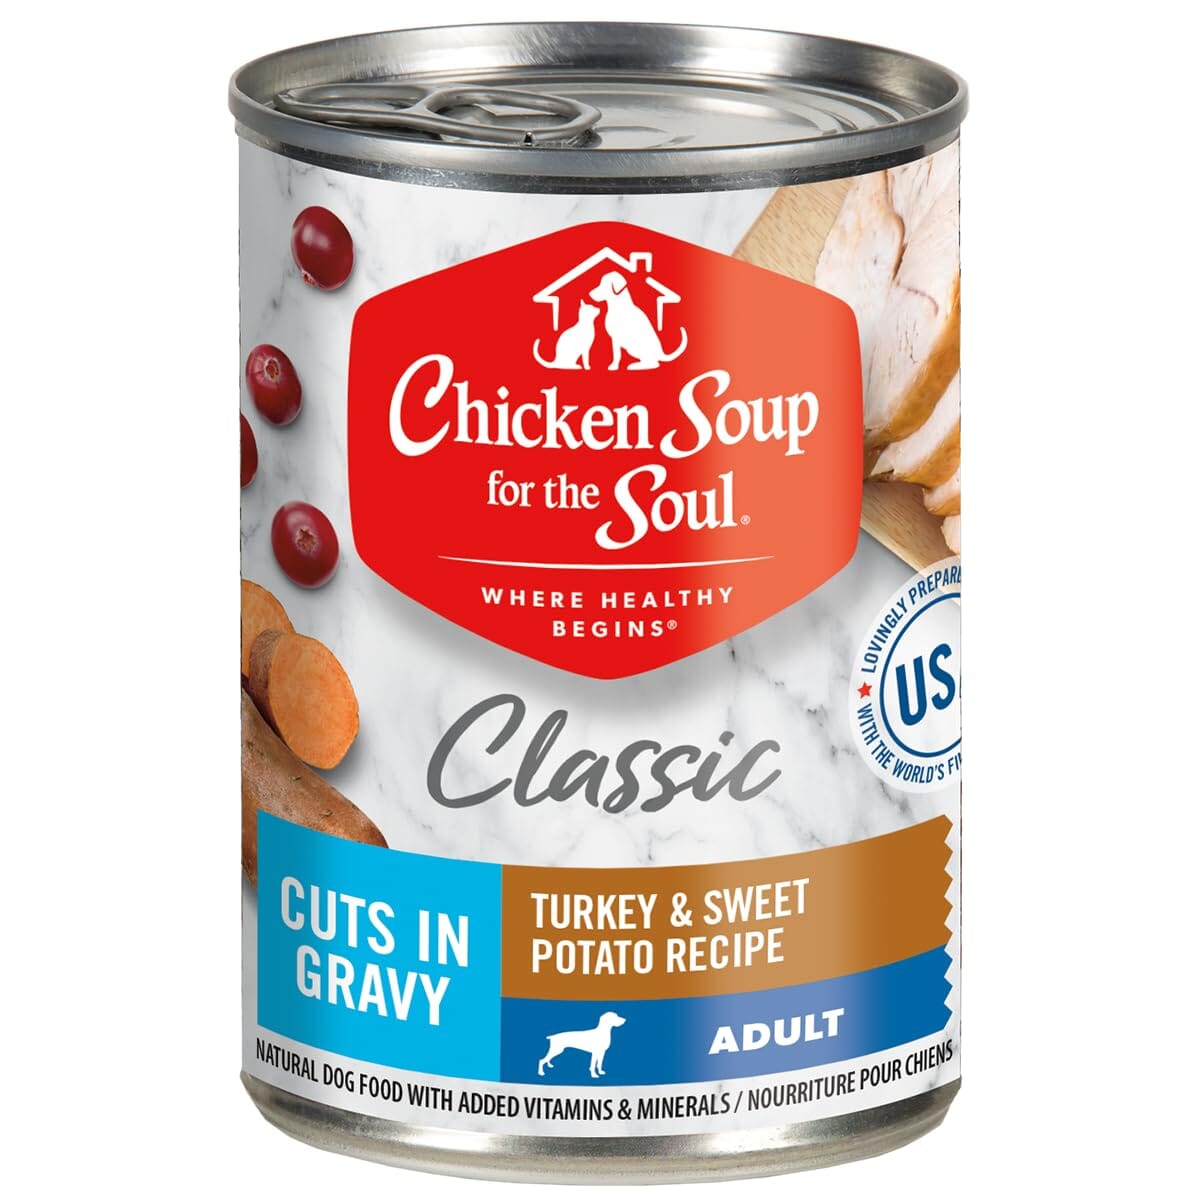 Chicken Soup for the Soul Turkey and Sweet Potato Canned Dog Food - 13 Oz - Case of 12  